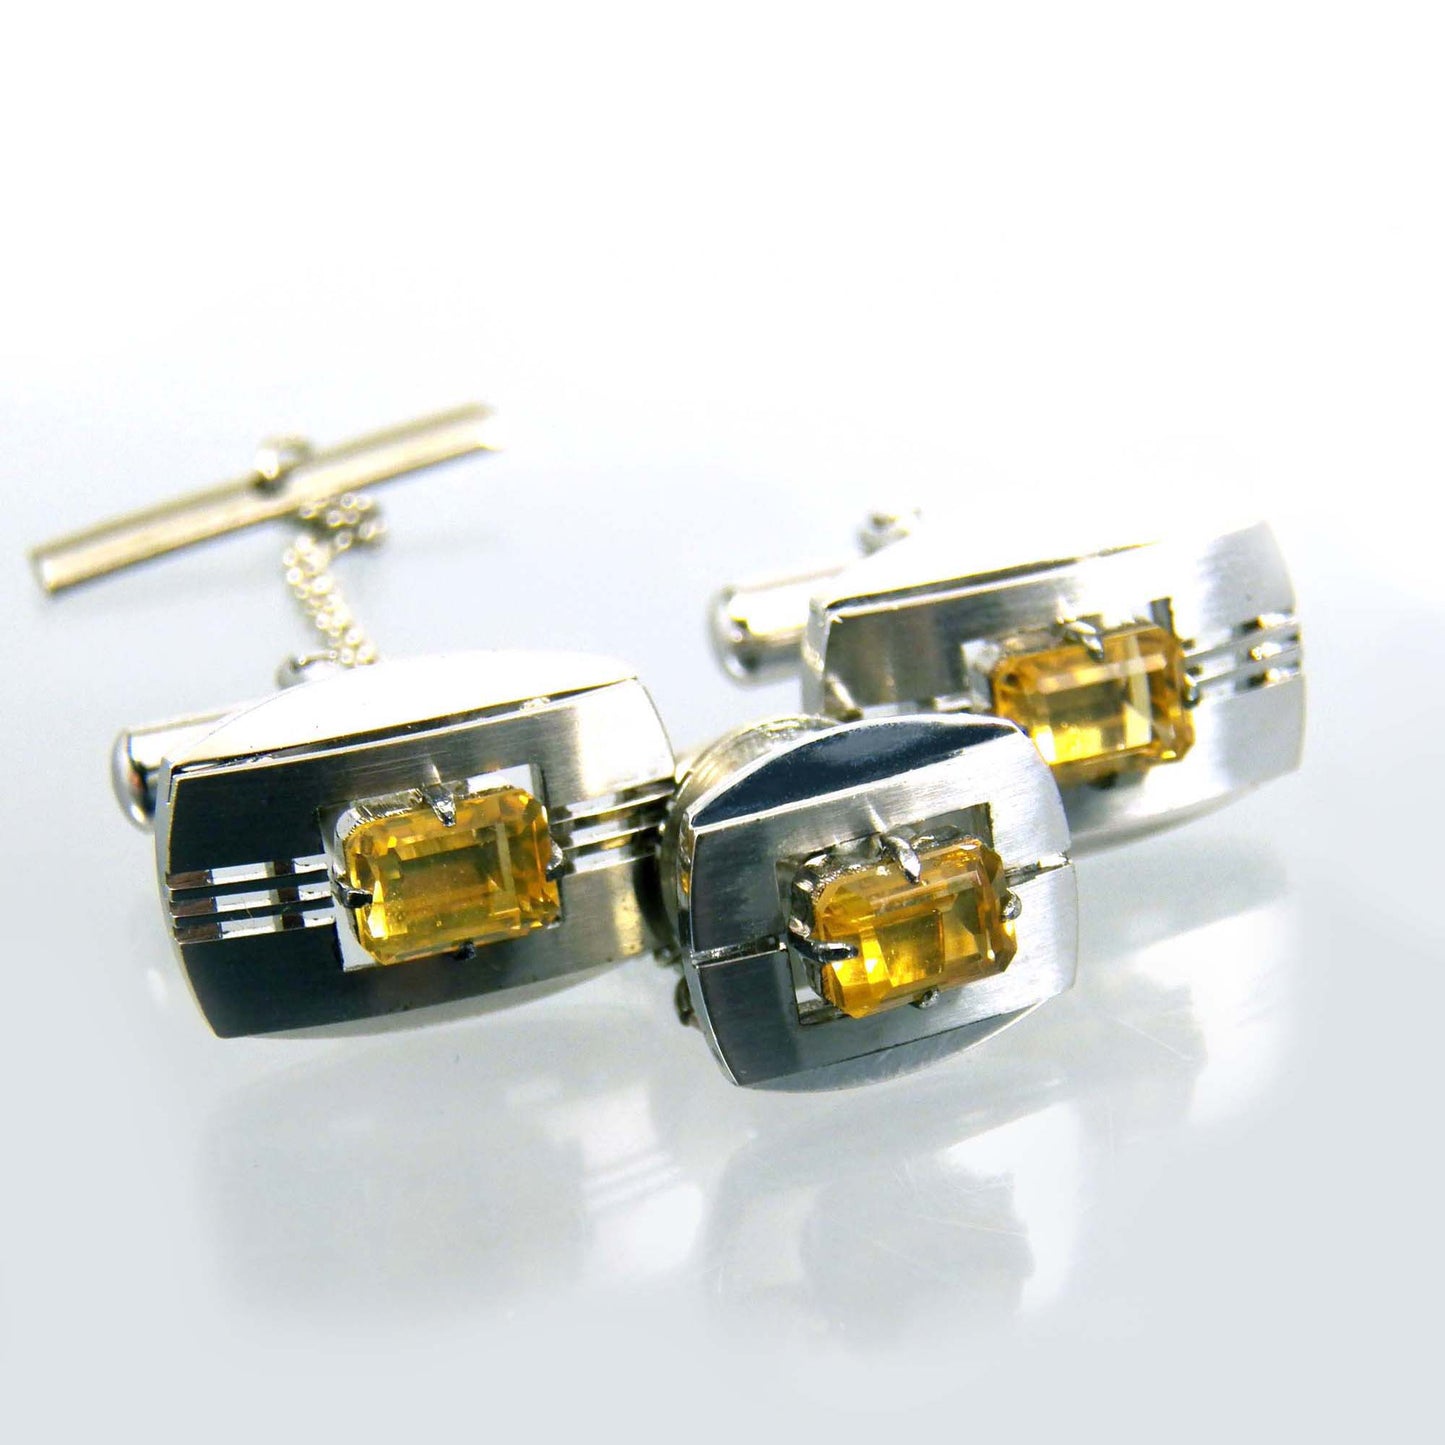 Sterling Silver Citrine Cufflinks and Tie Tack Pin Set